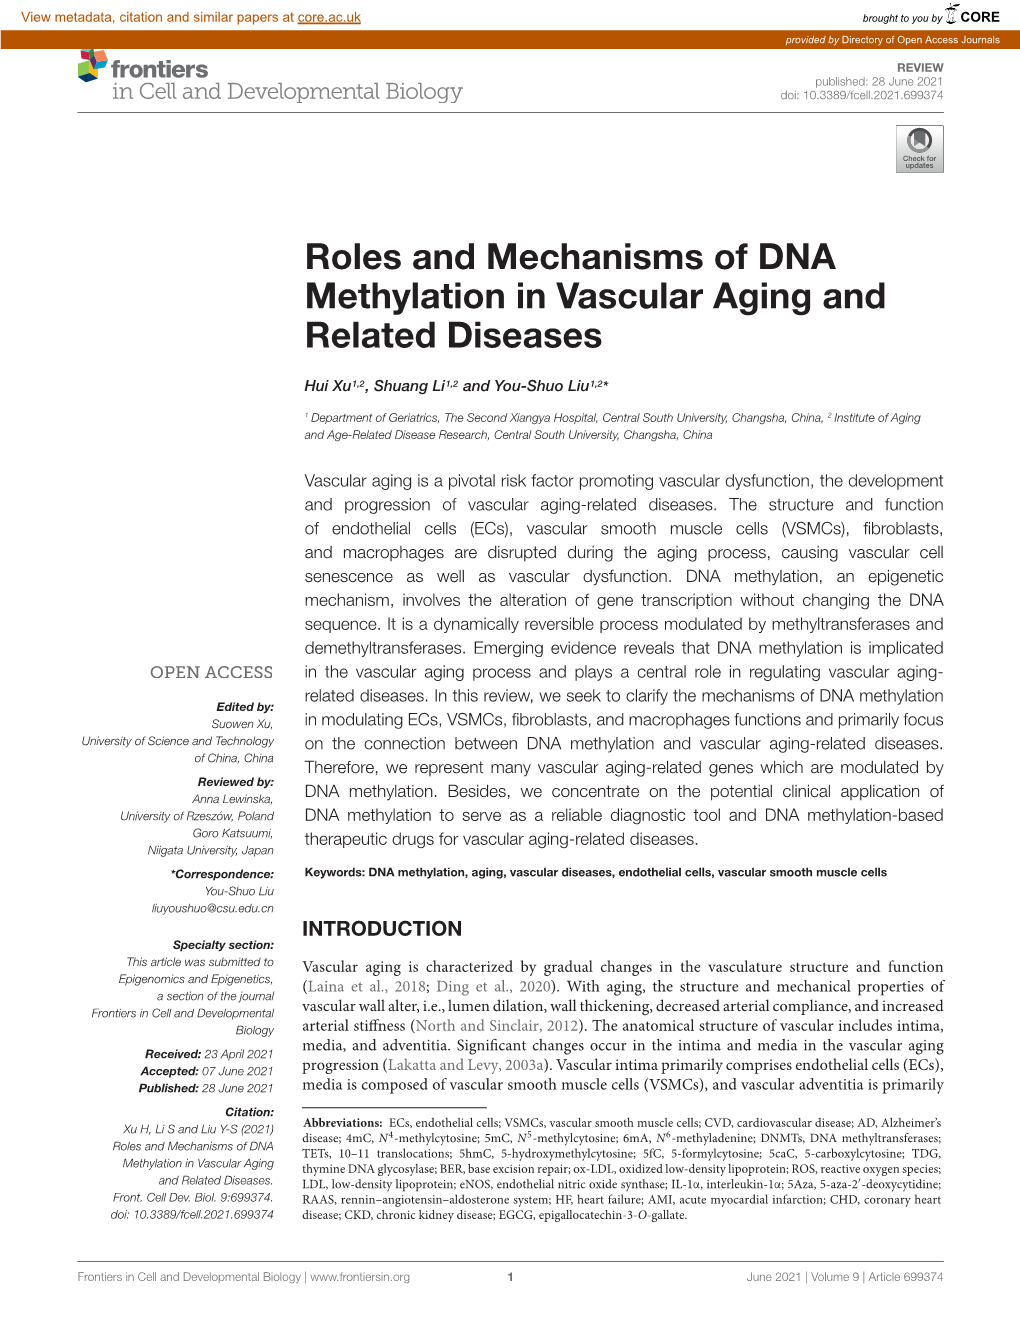 Roles and Mechanisms of DNA Methylation in Vascular Aging and Related Diseases